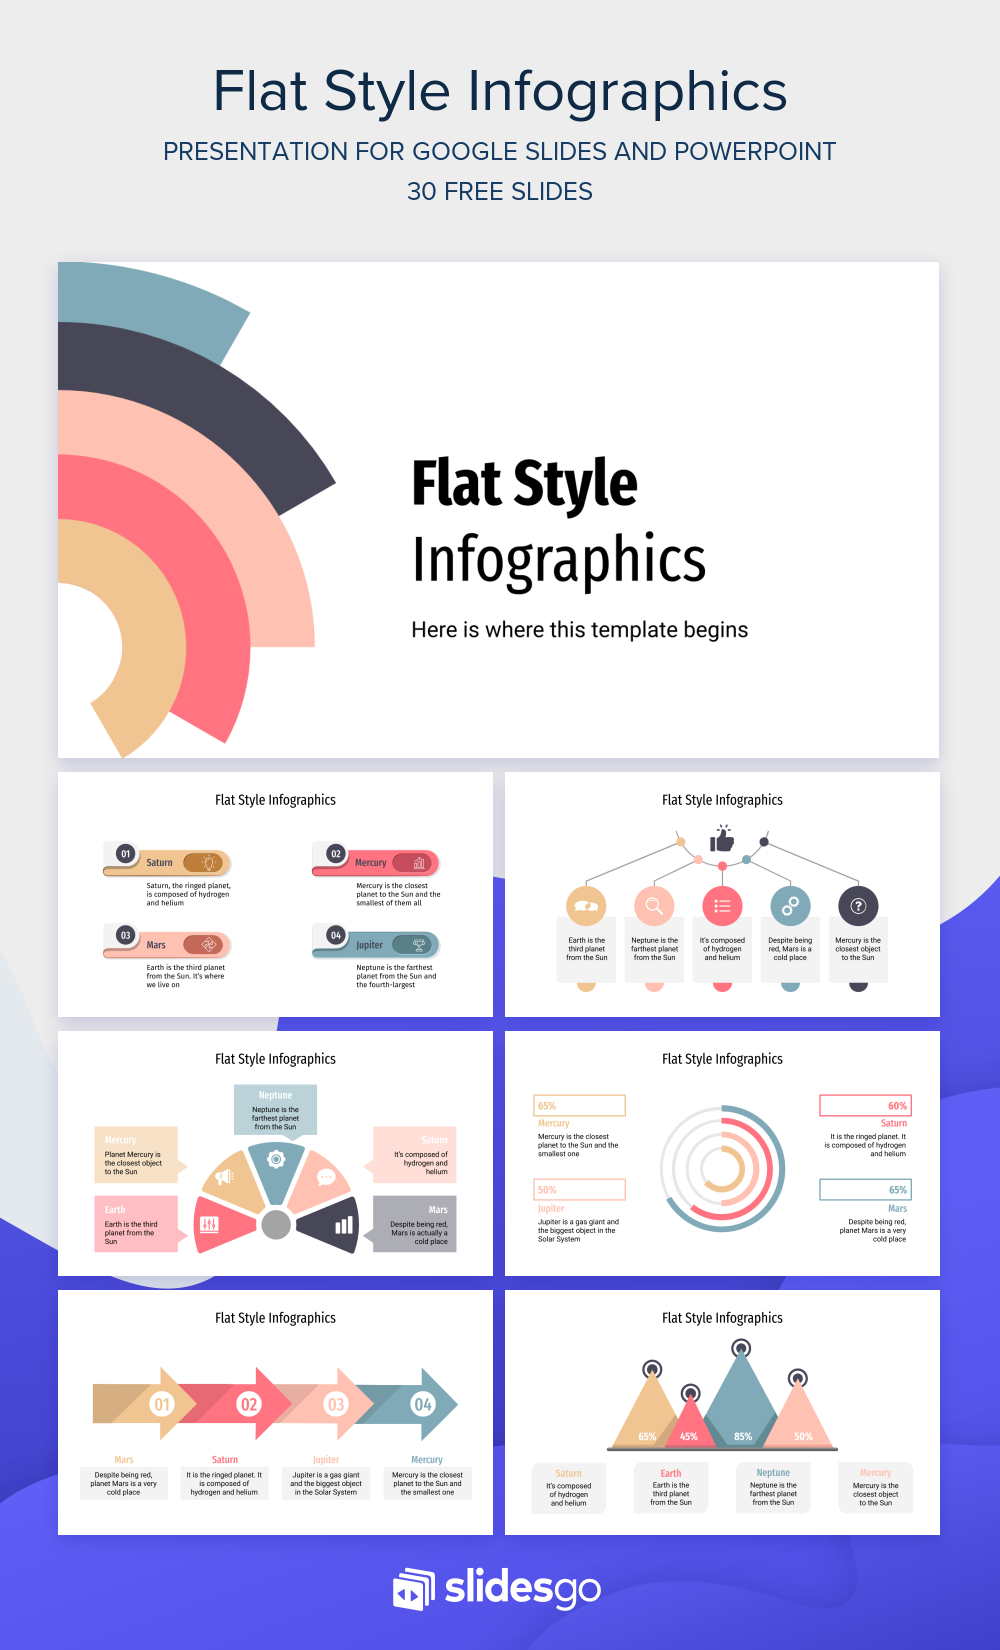 Flat Style Infographics for Google Slides and PowerPoint